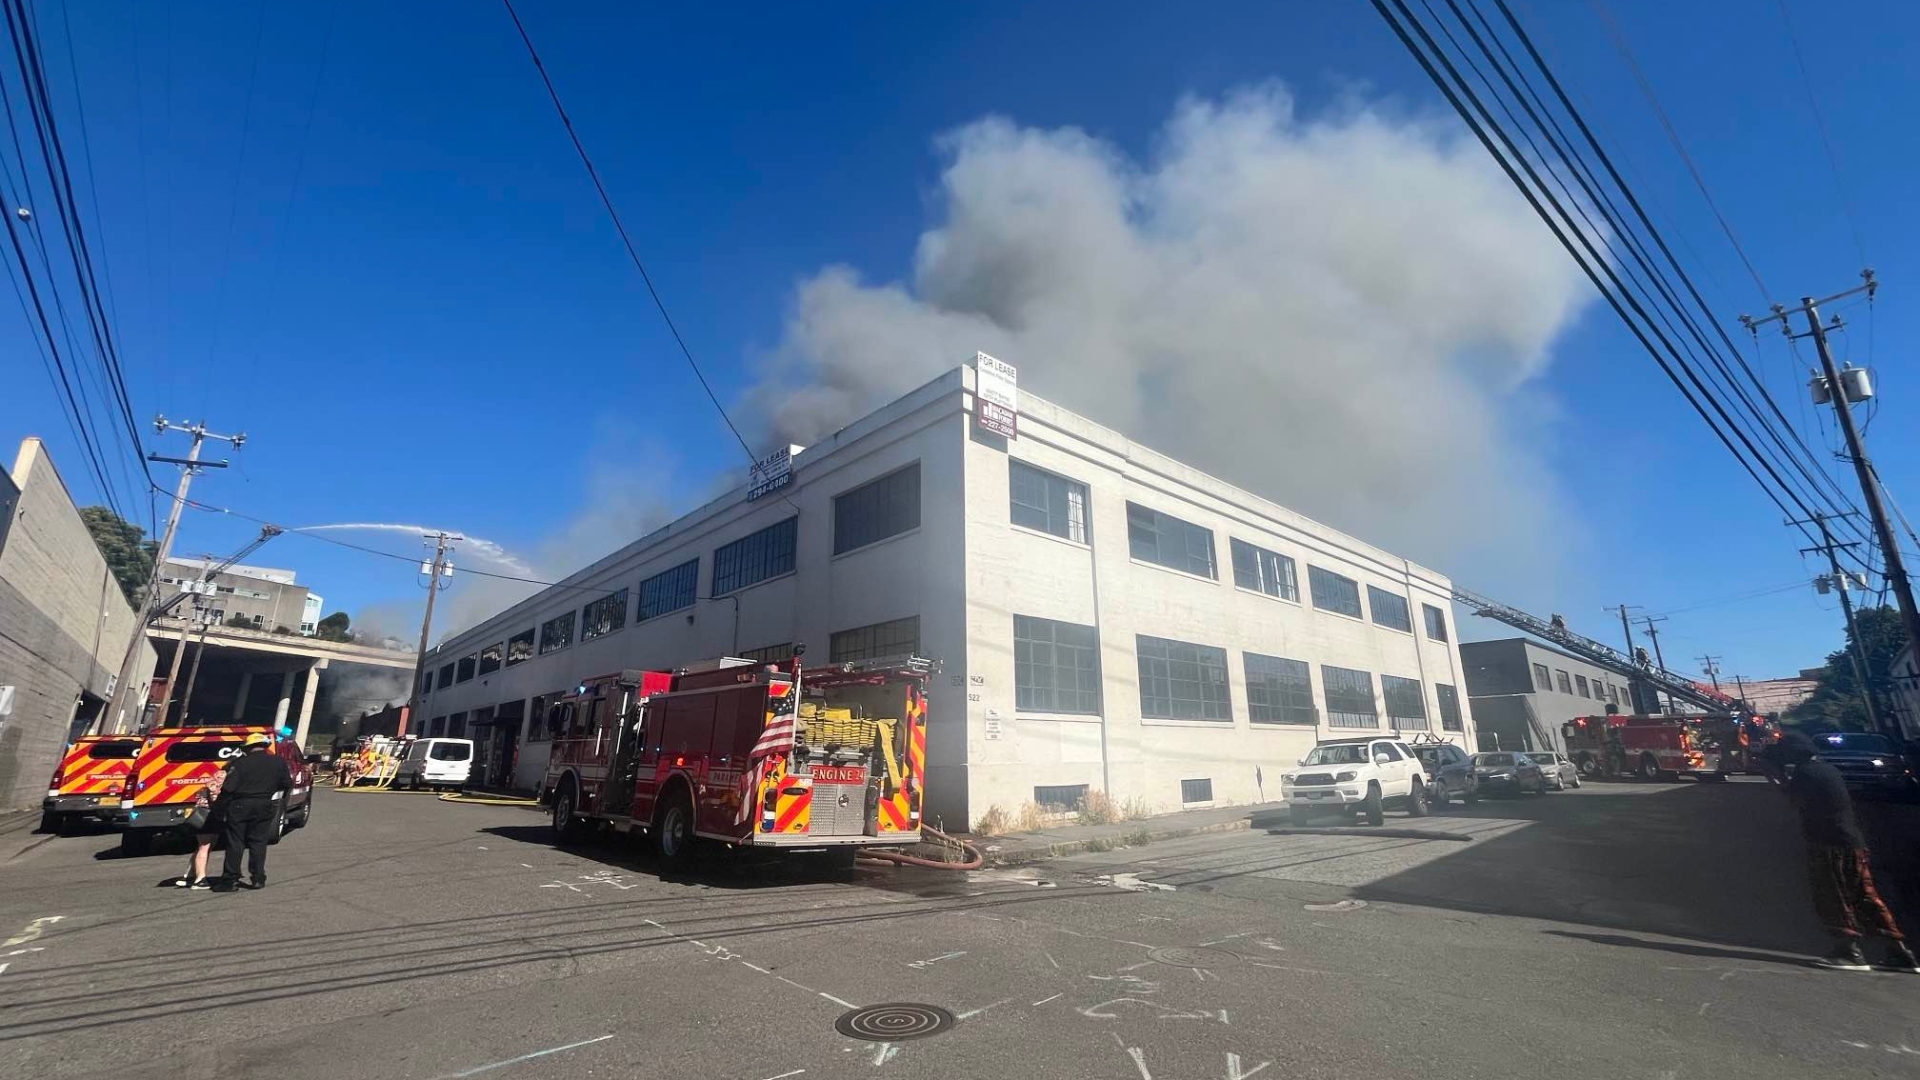 Fire at Portland warehouse sends plume of smoke over city